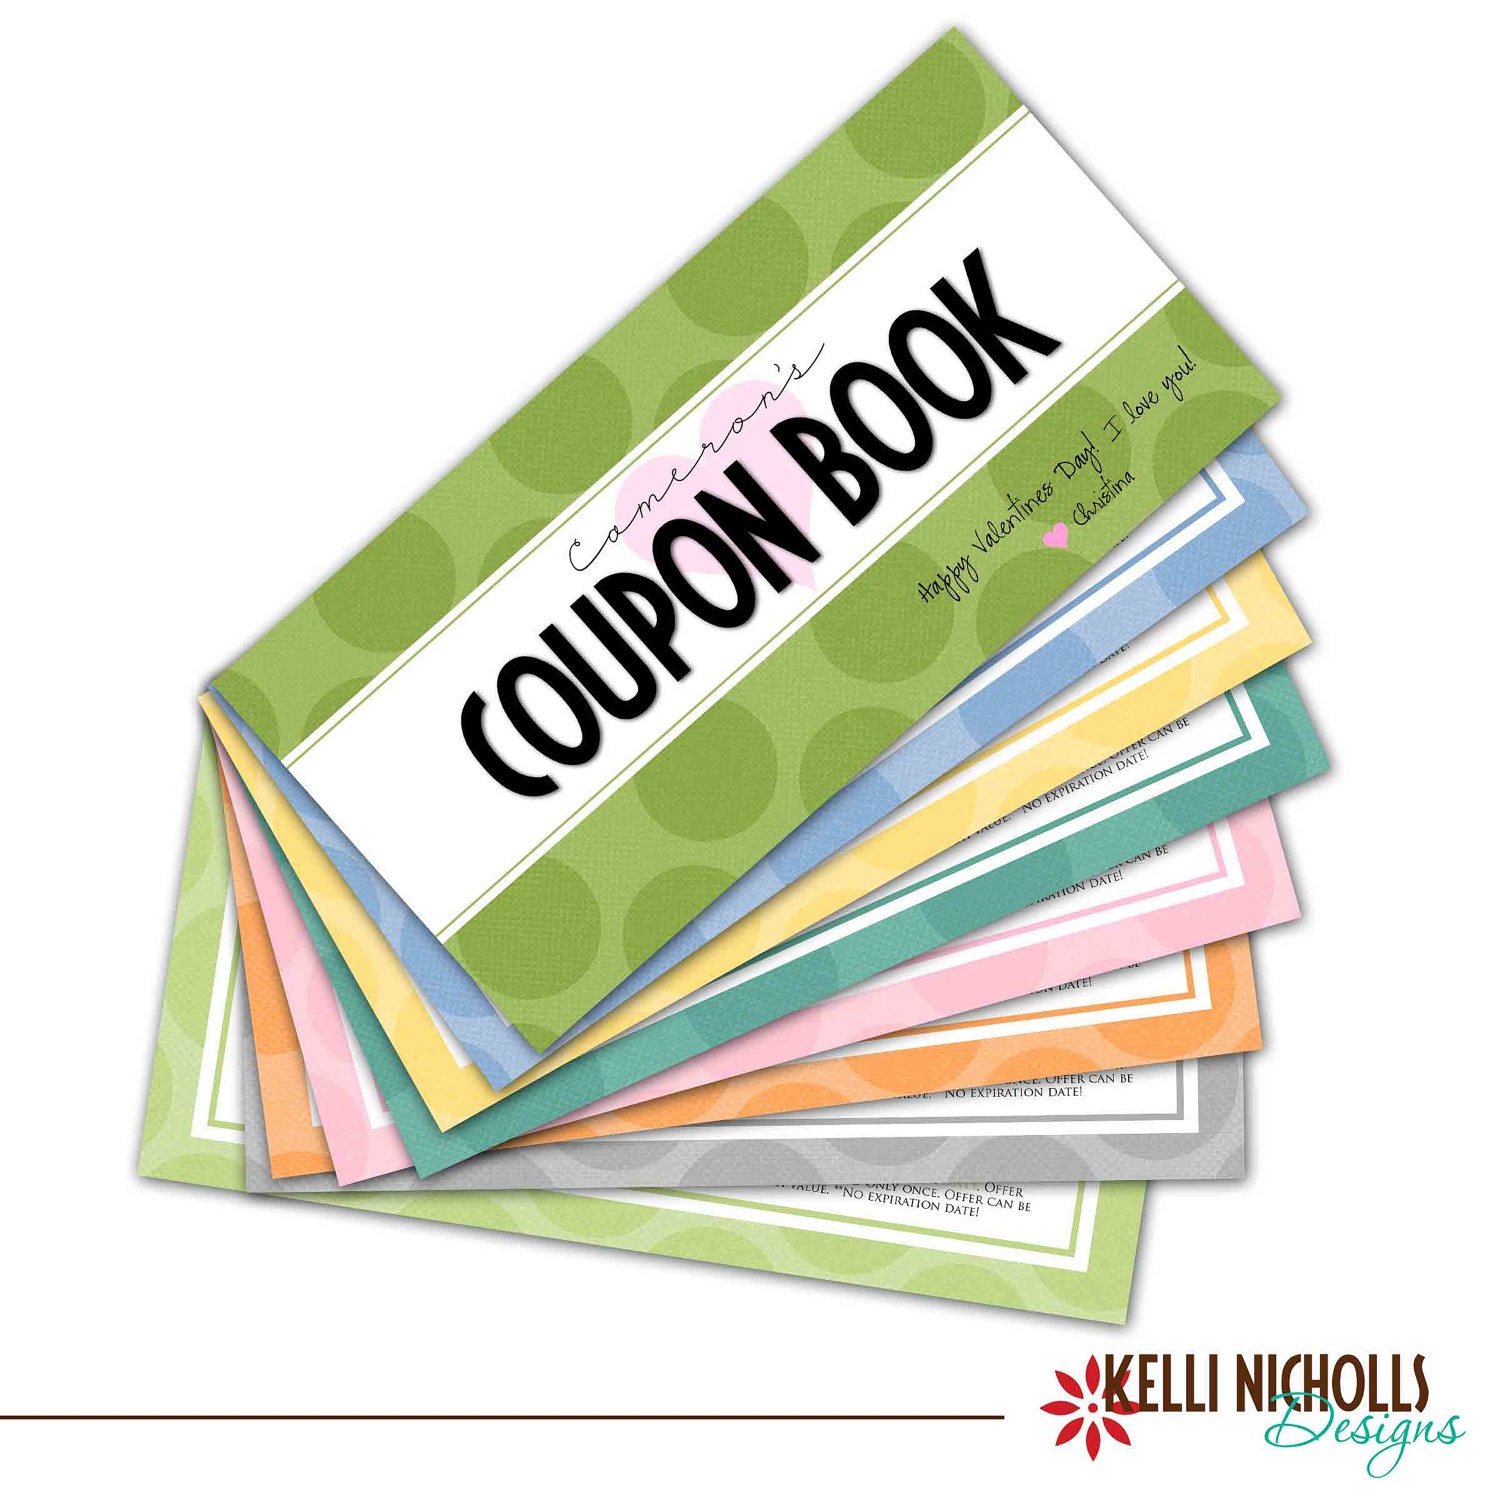 Printable Coupon Book CUSTOM FOR dmuther